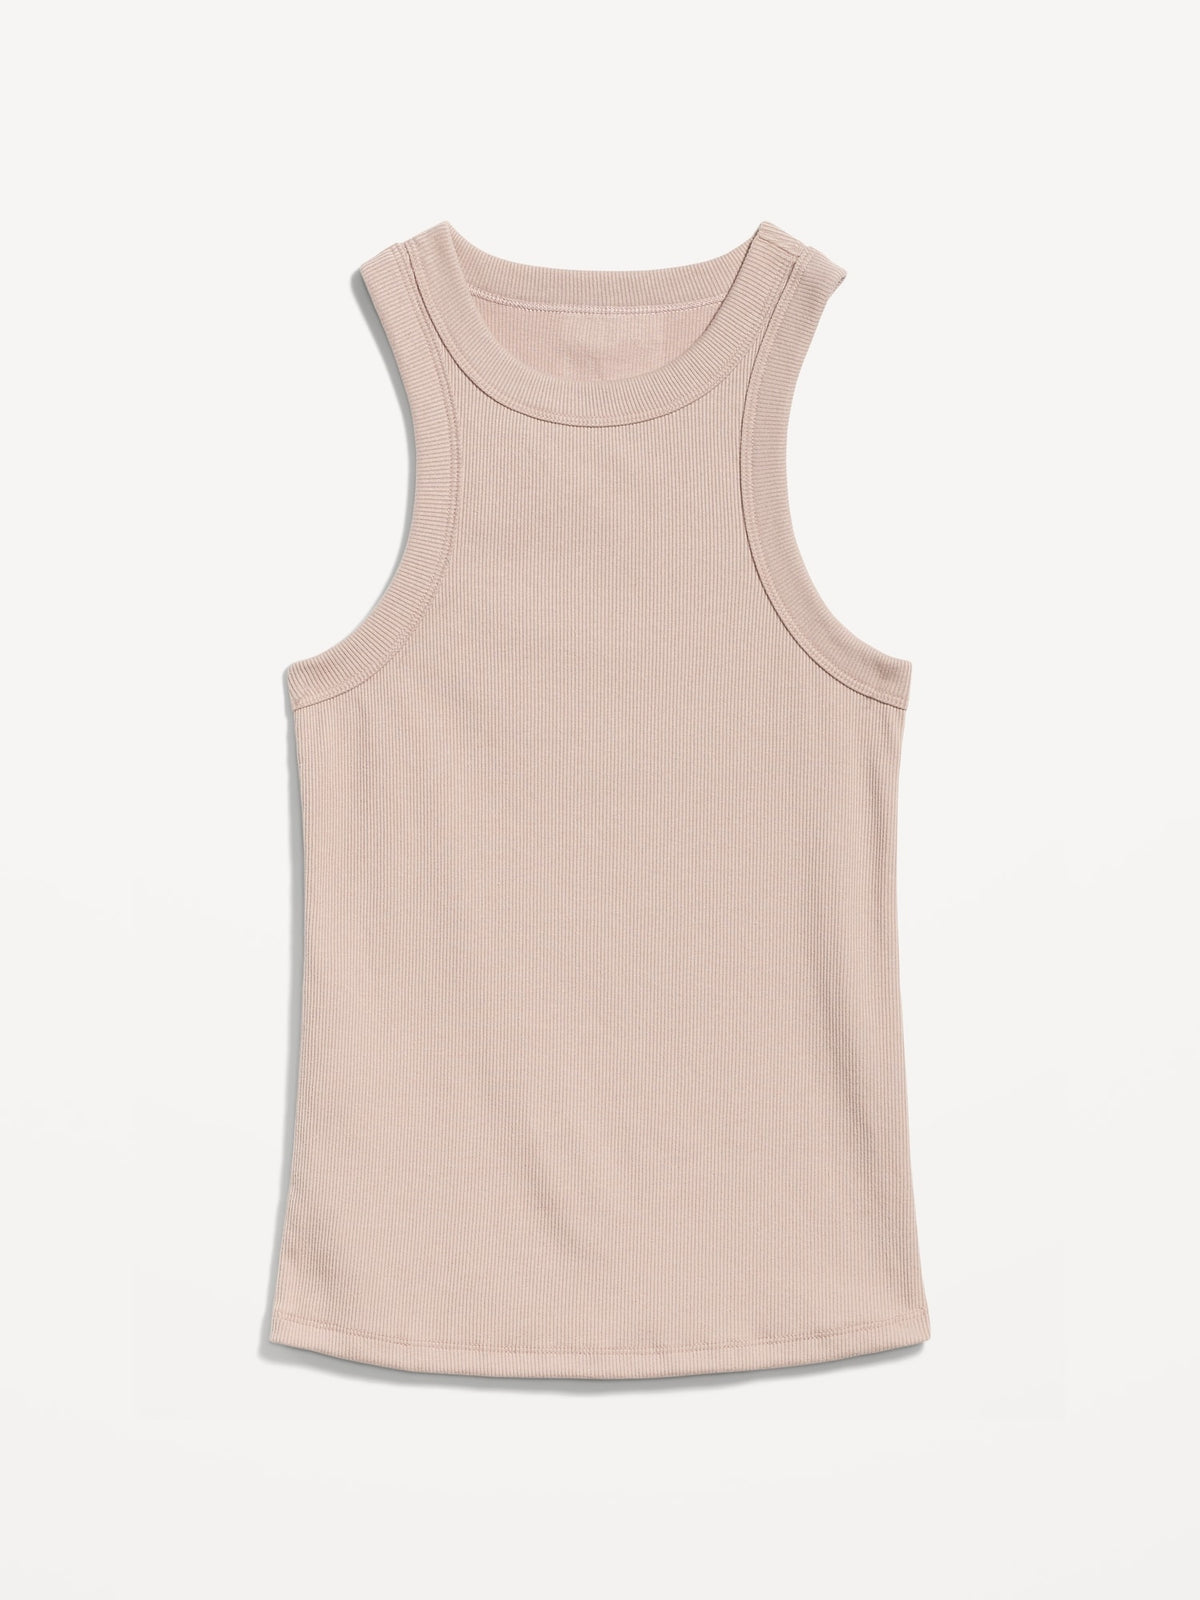 Fitted Rib-Knit Tank Top for Women